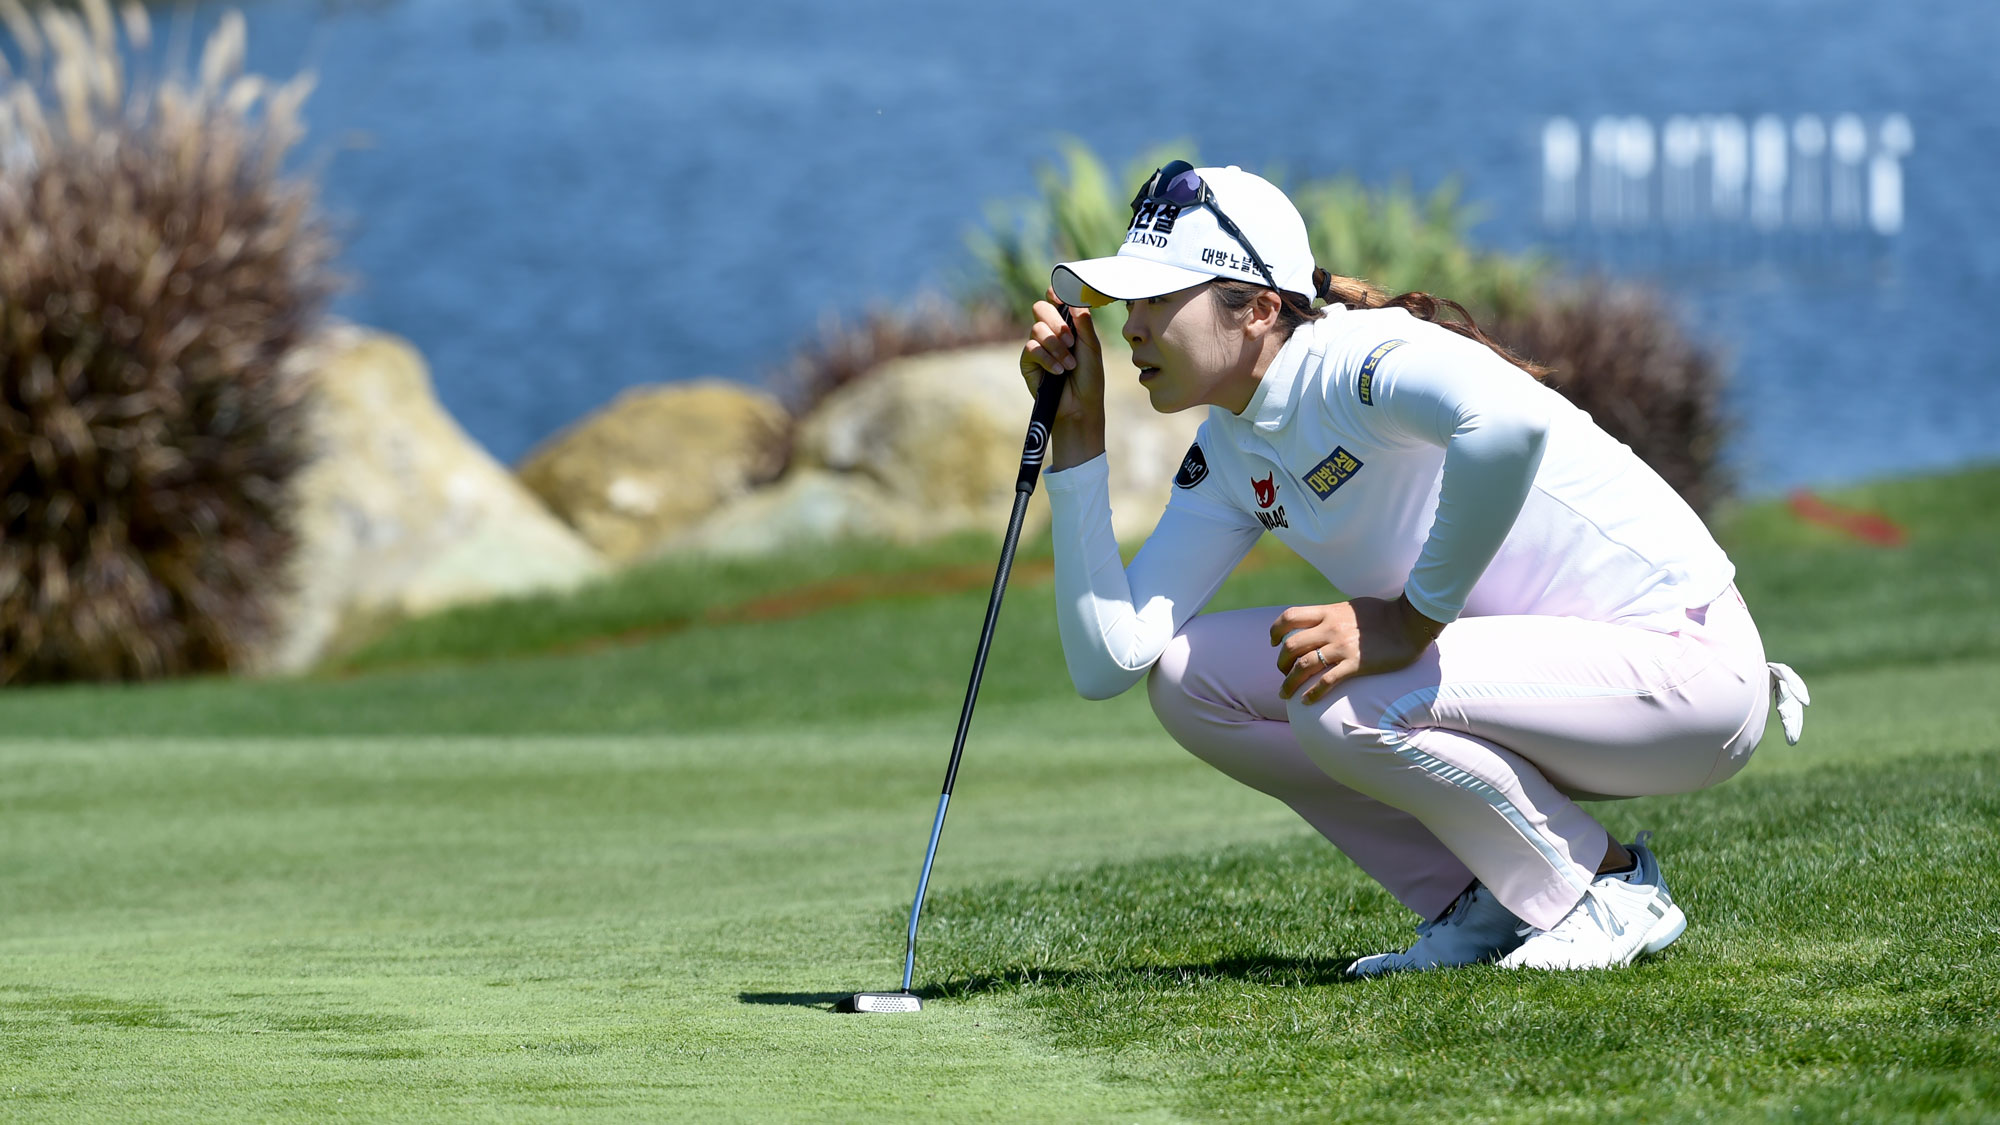 Mi Jung Hur of Korea lines up her putt on the 18th green on the way to shooting a course record 10 under par 62 during the third round of the Kia Classic 